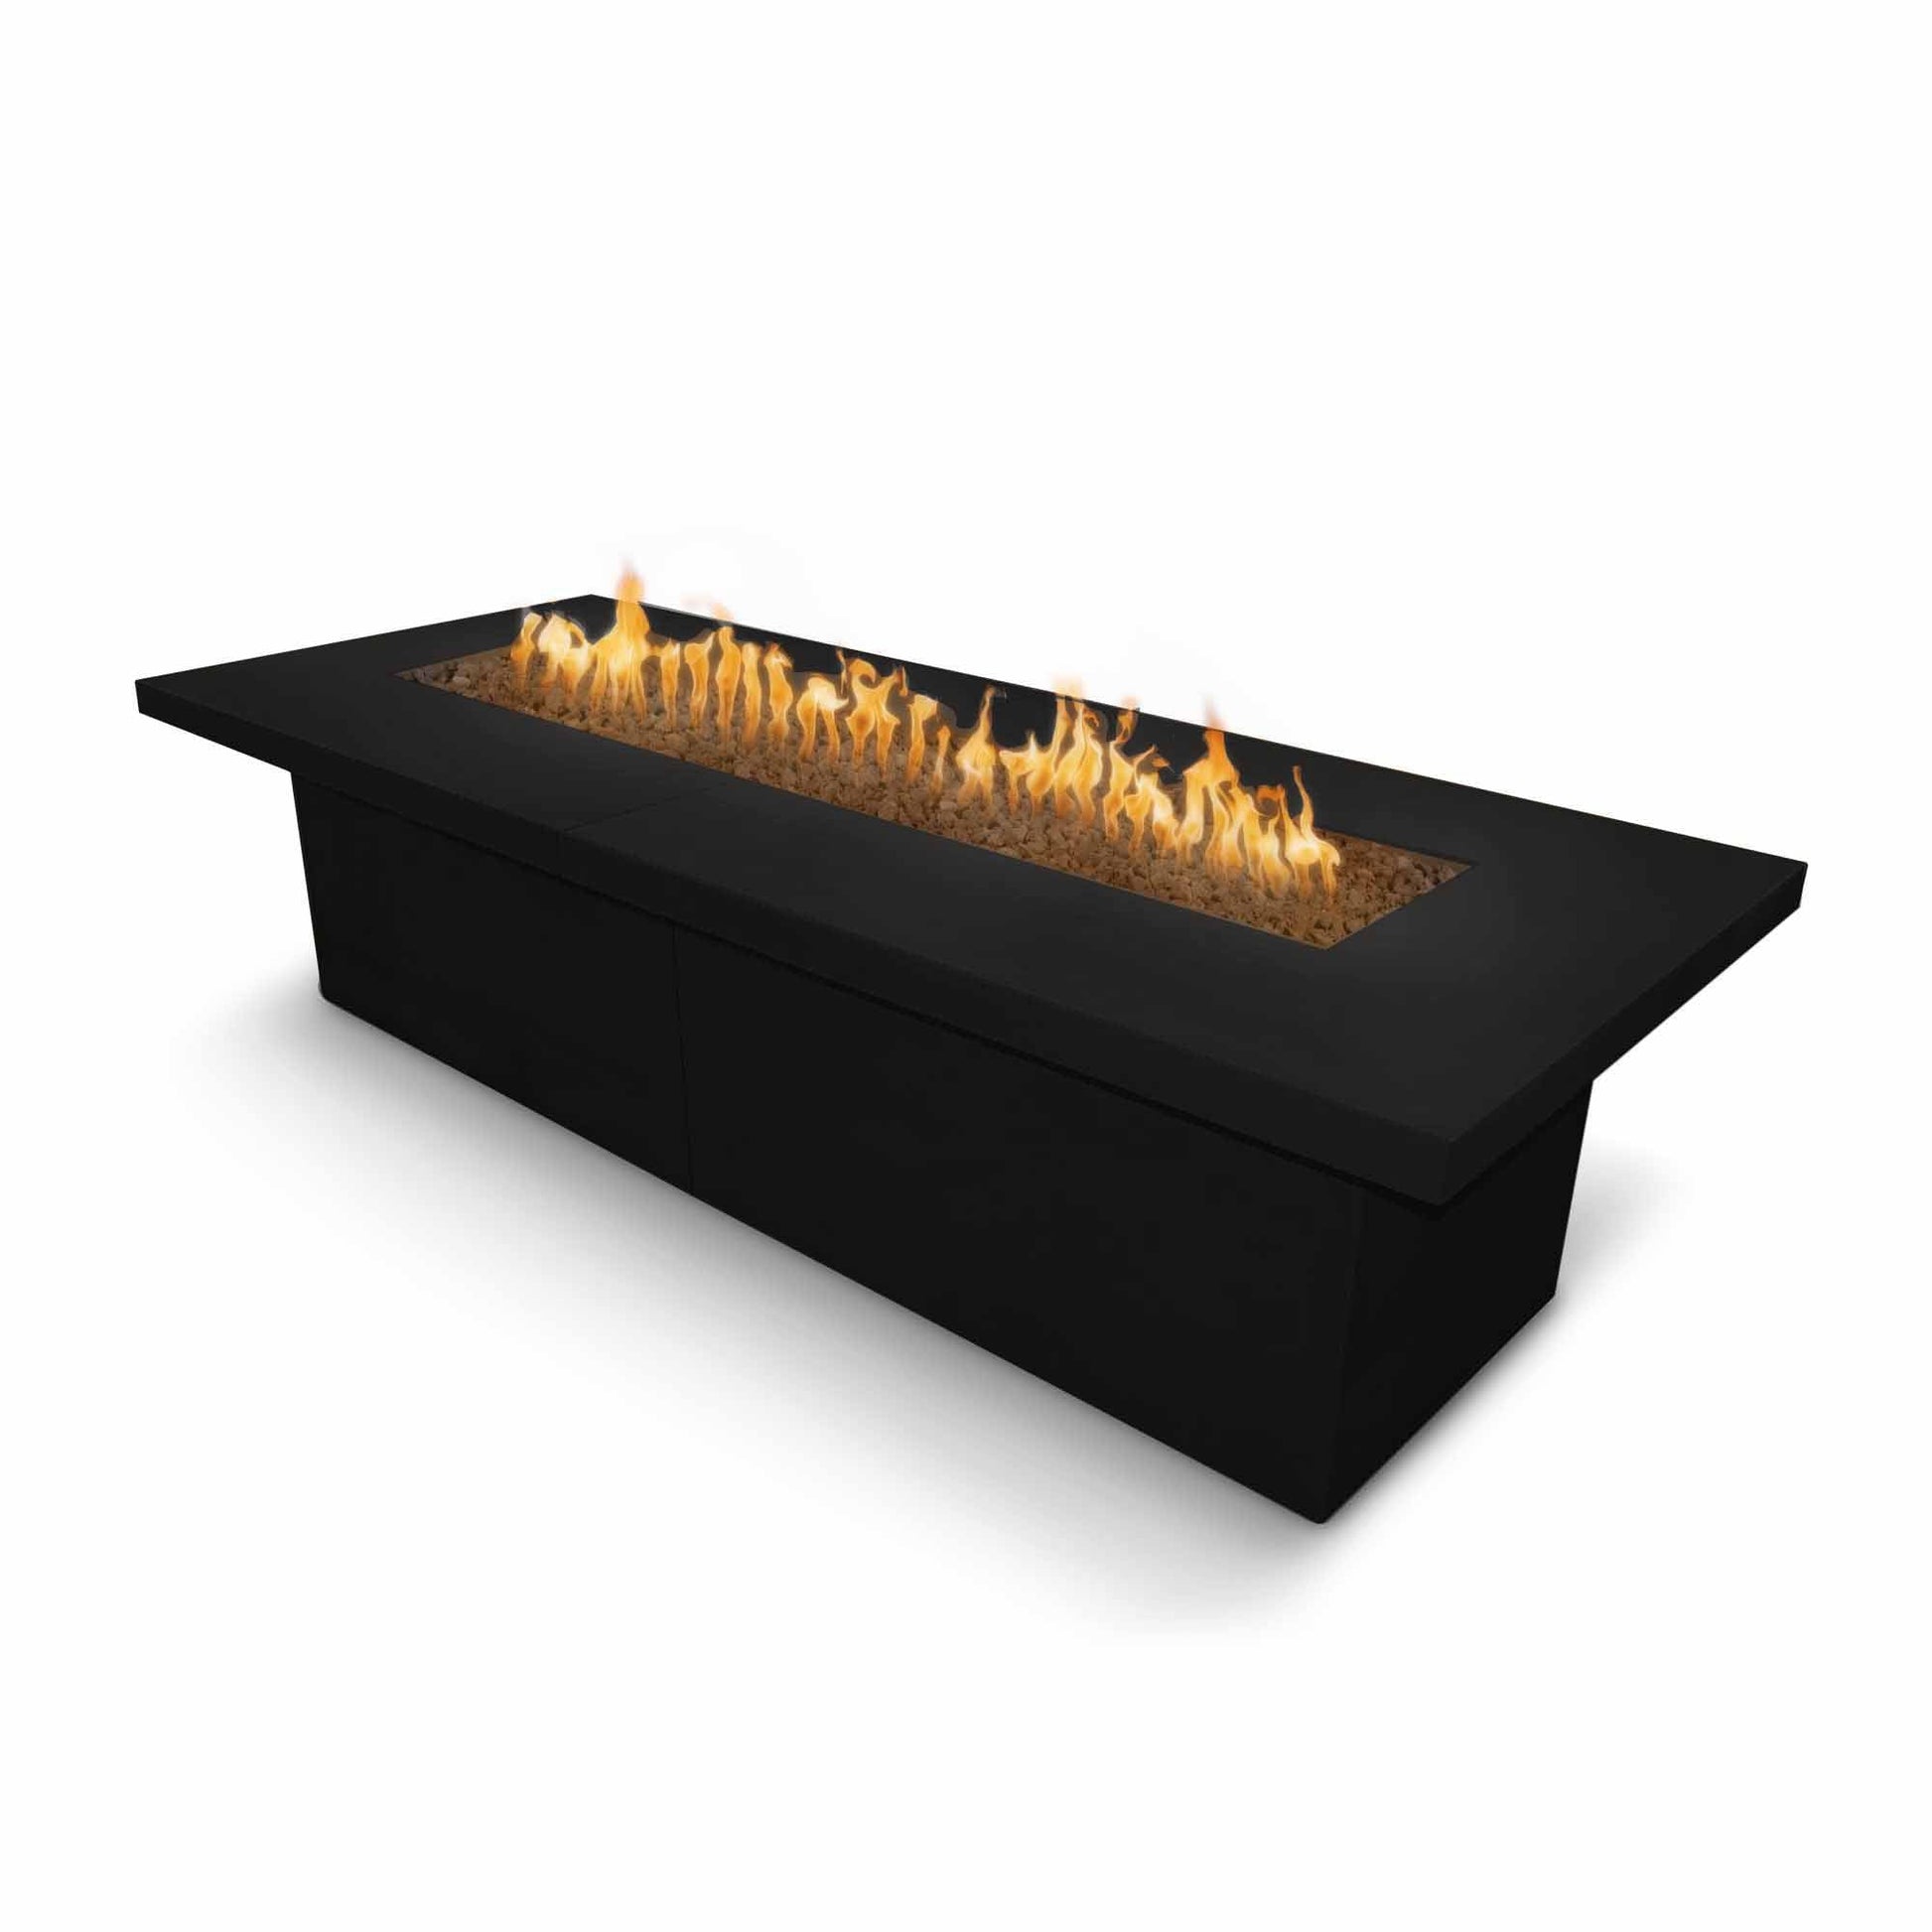 The Outdoor Plus Rectangular Newport 120" White Powder Coated Metal Liquid Propane Fire Pit with 110V Electronic Ignition